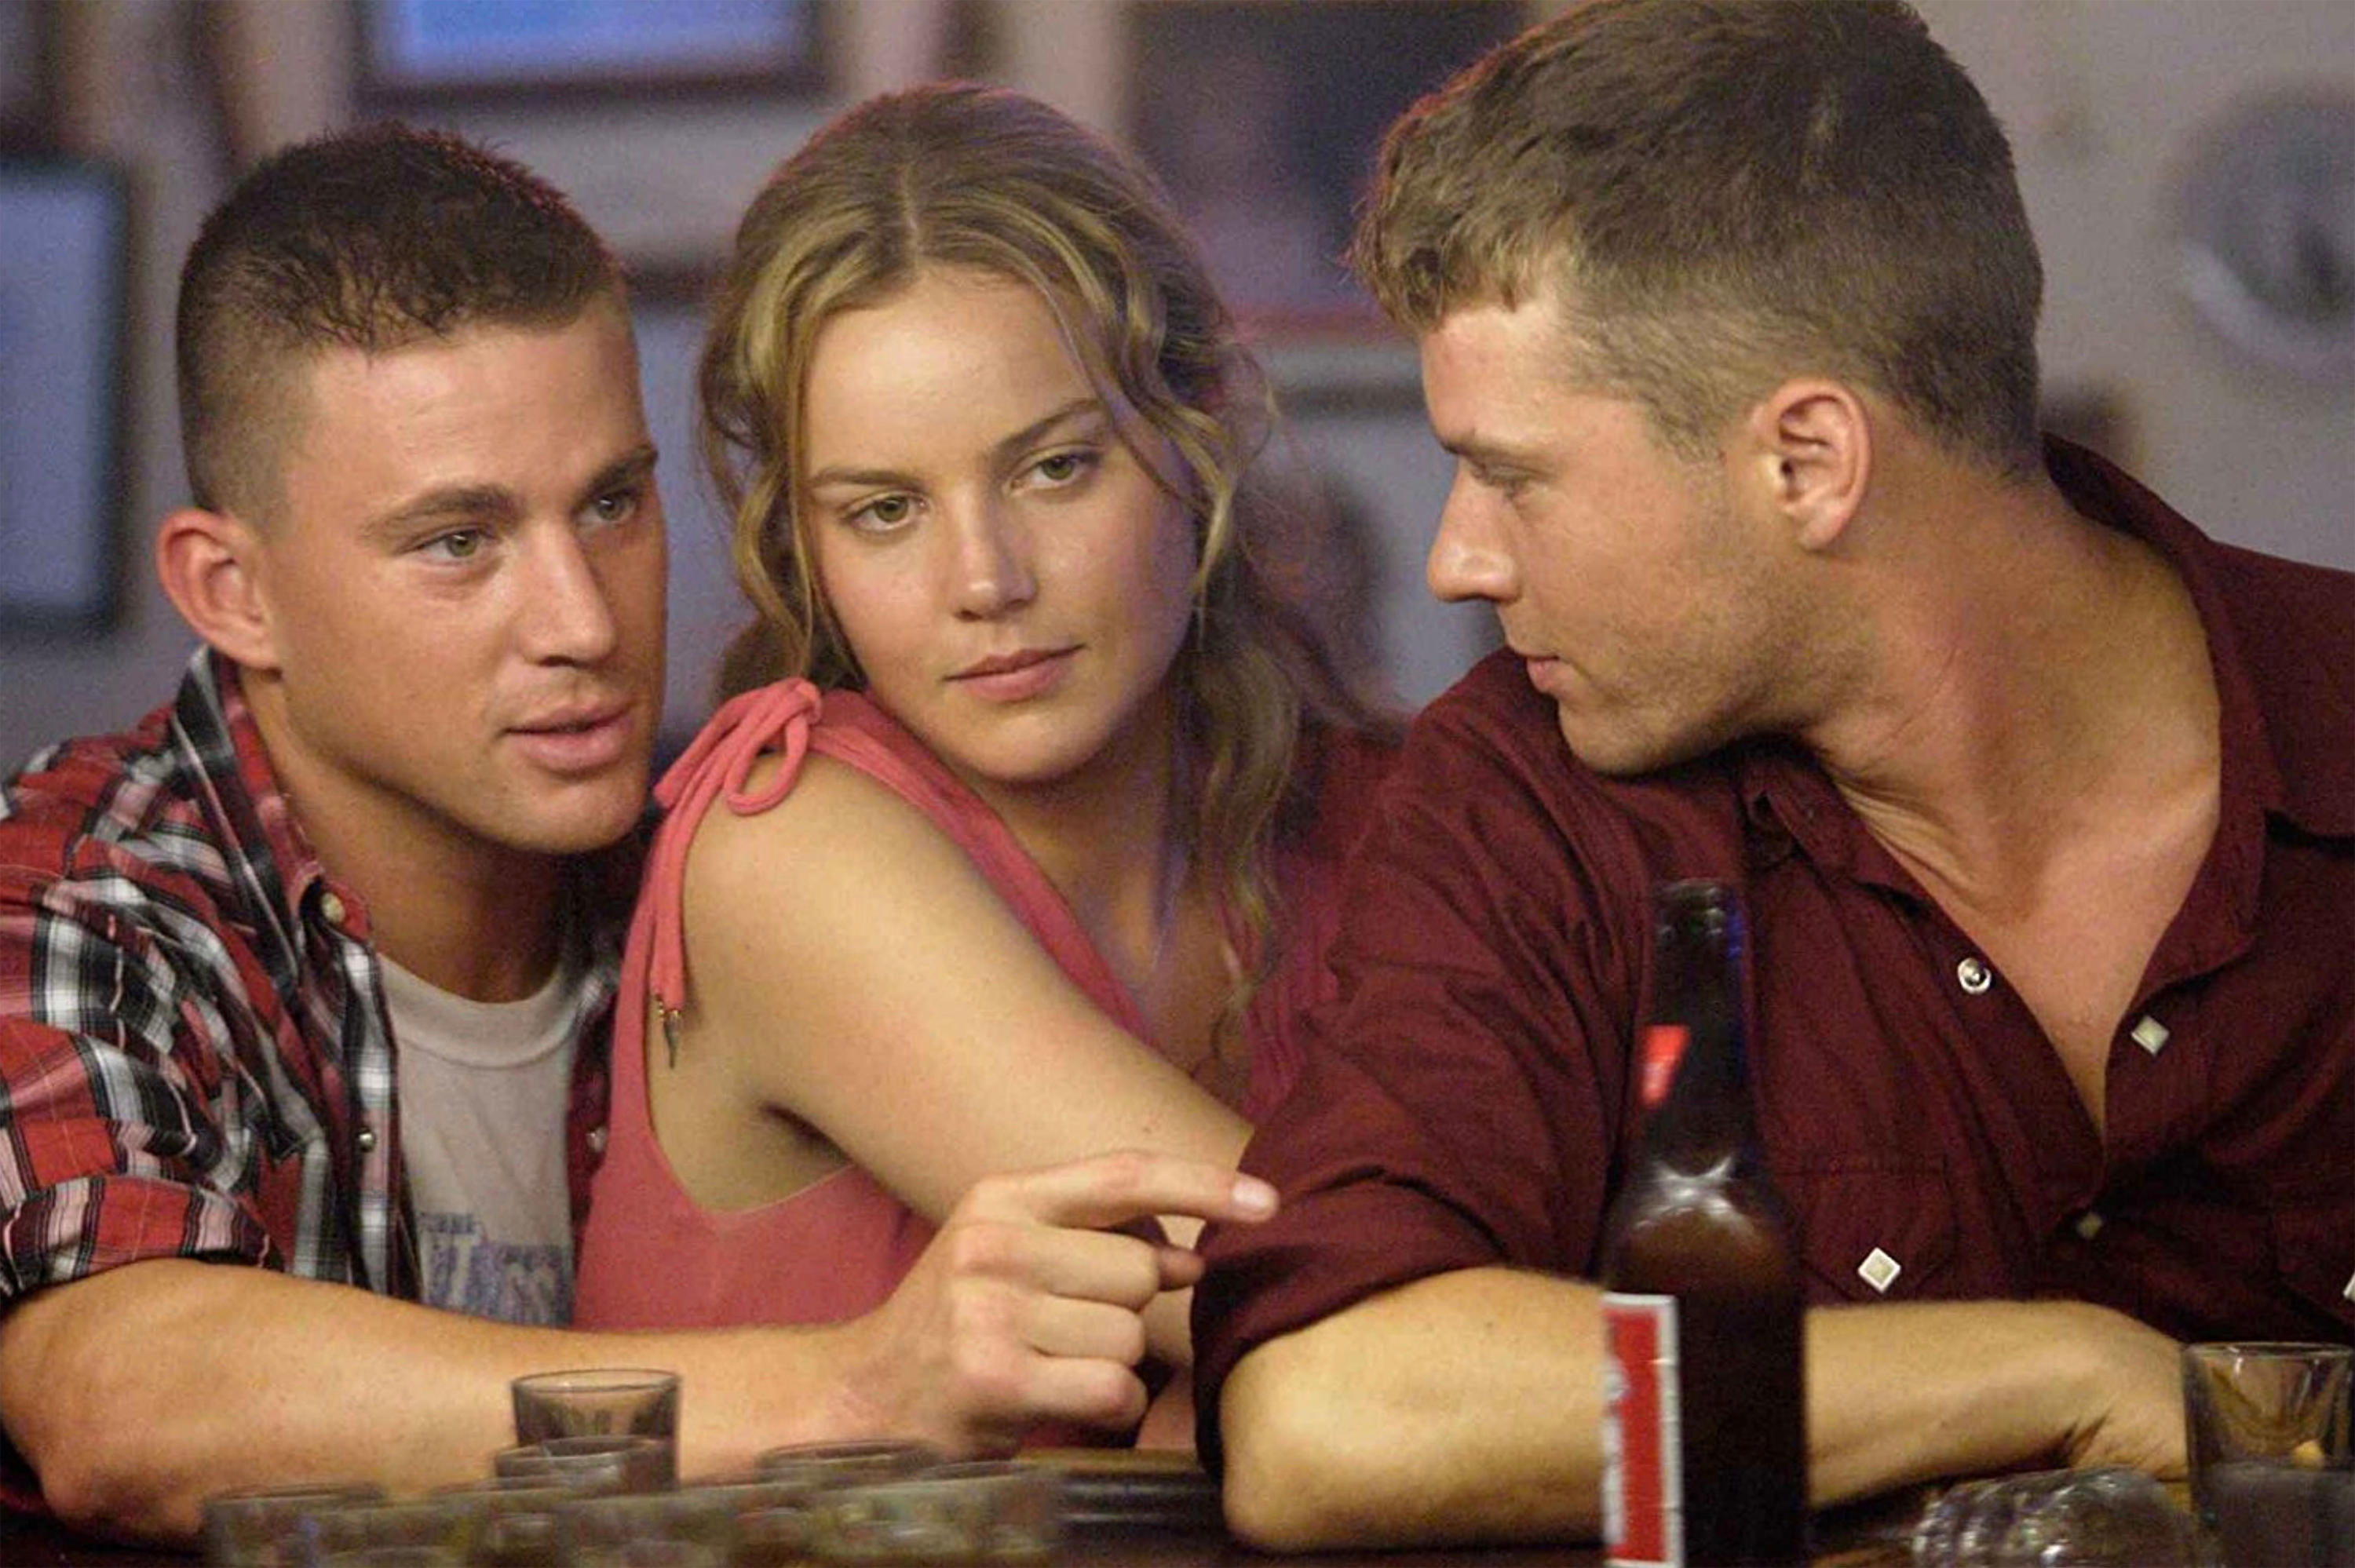 Channing Tatum, Abbie Cornish and Ryan Phillippe sit together at a bar